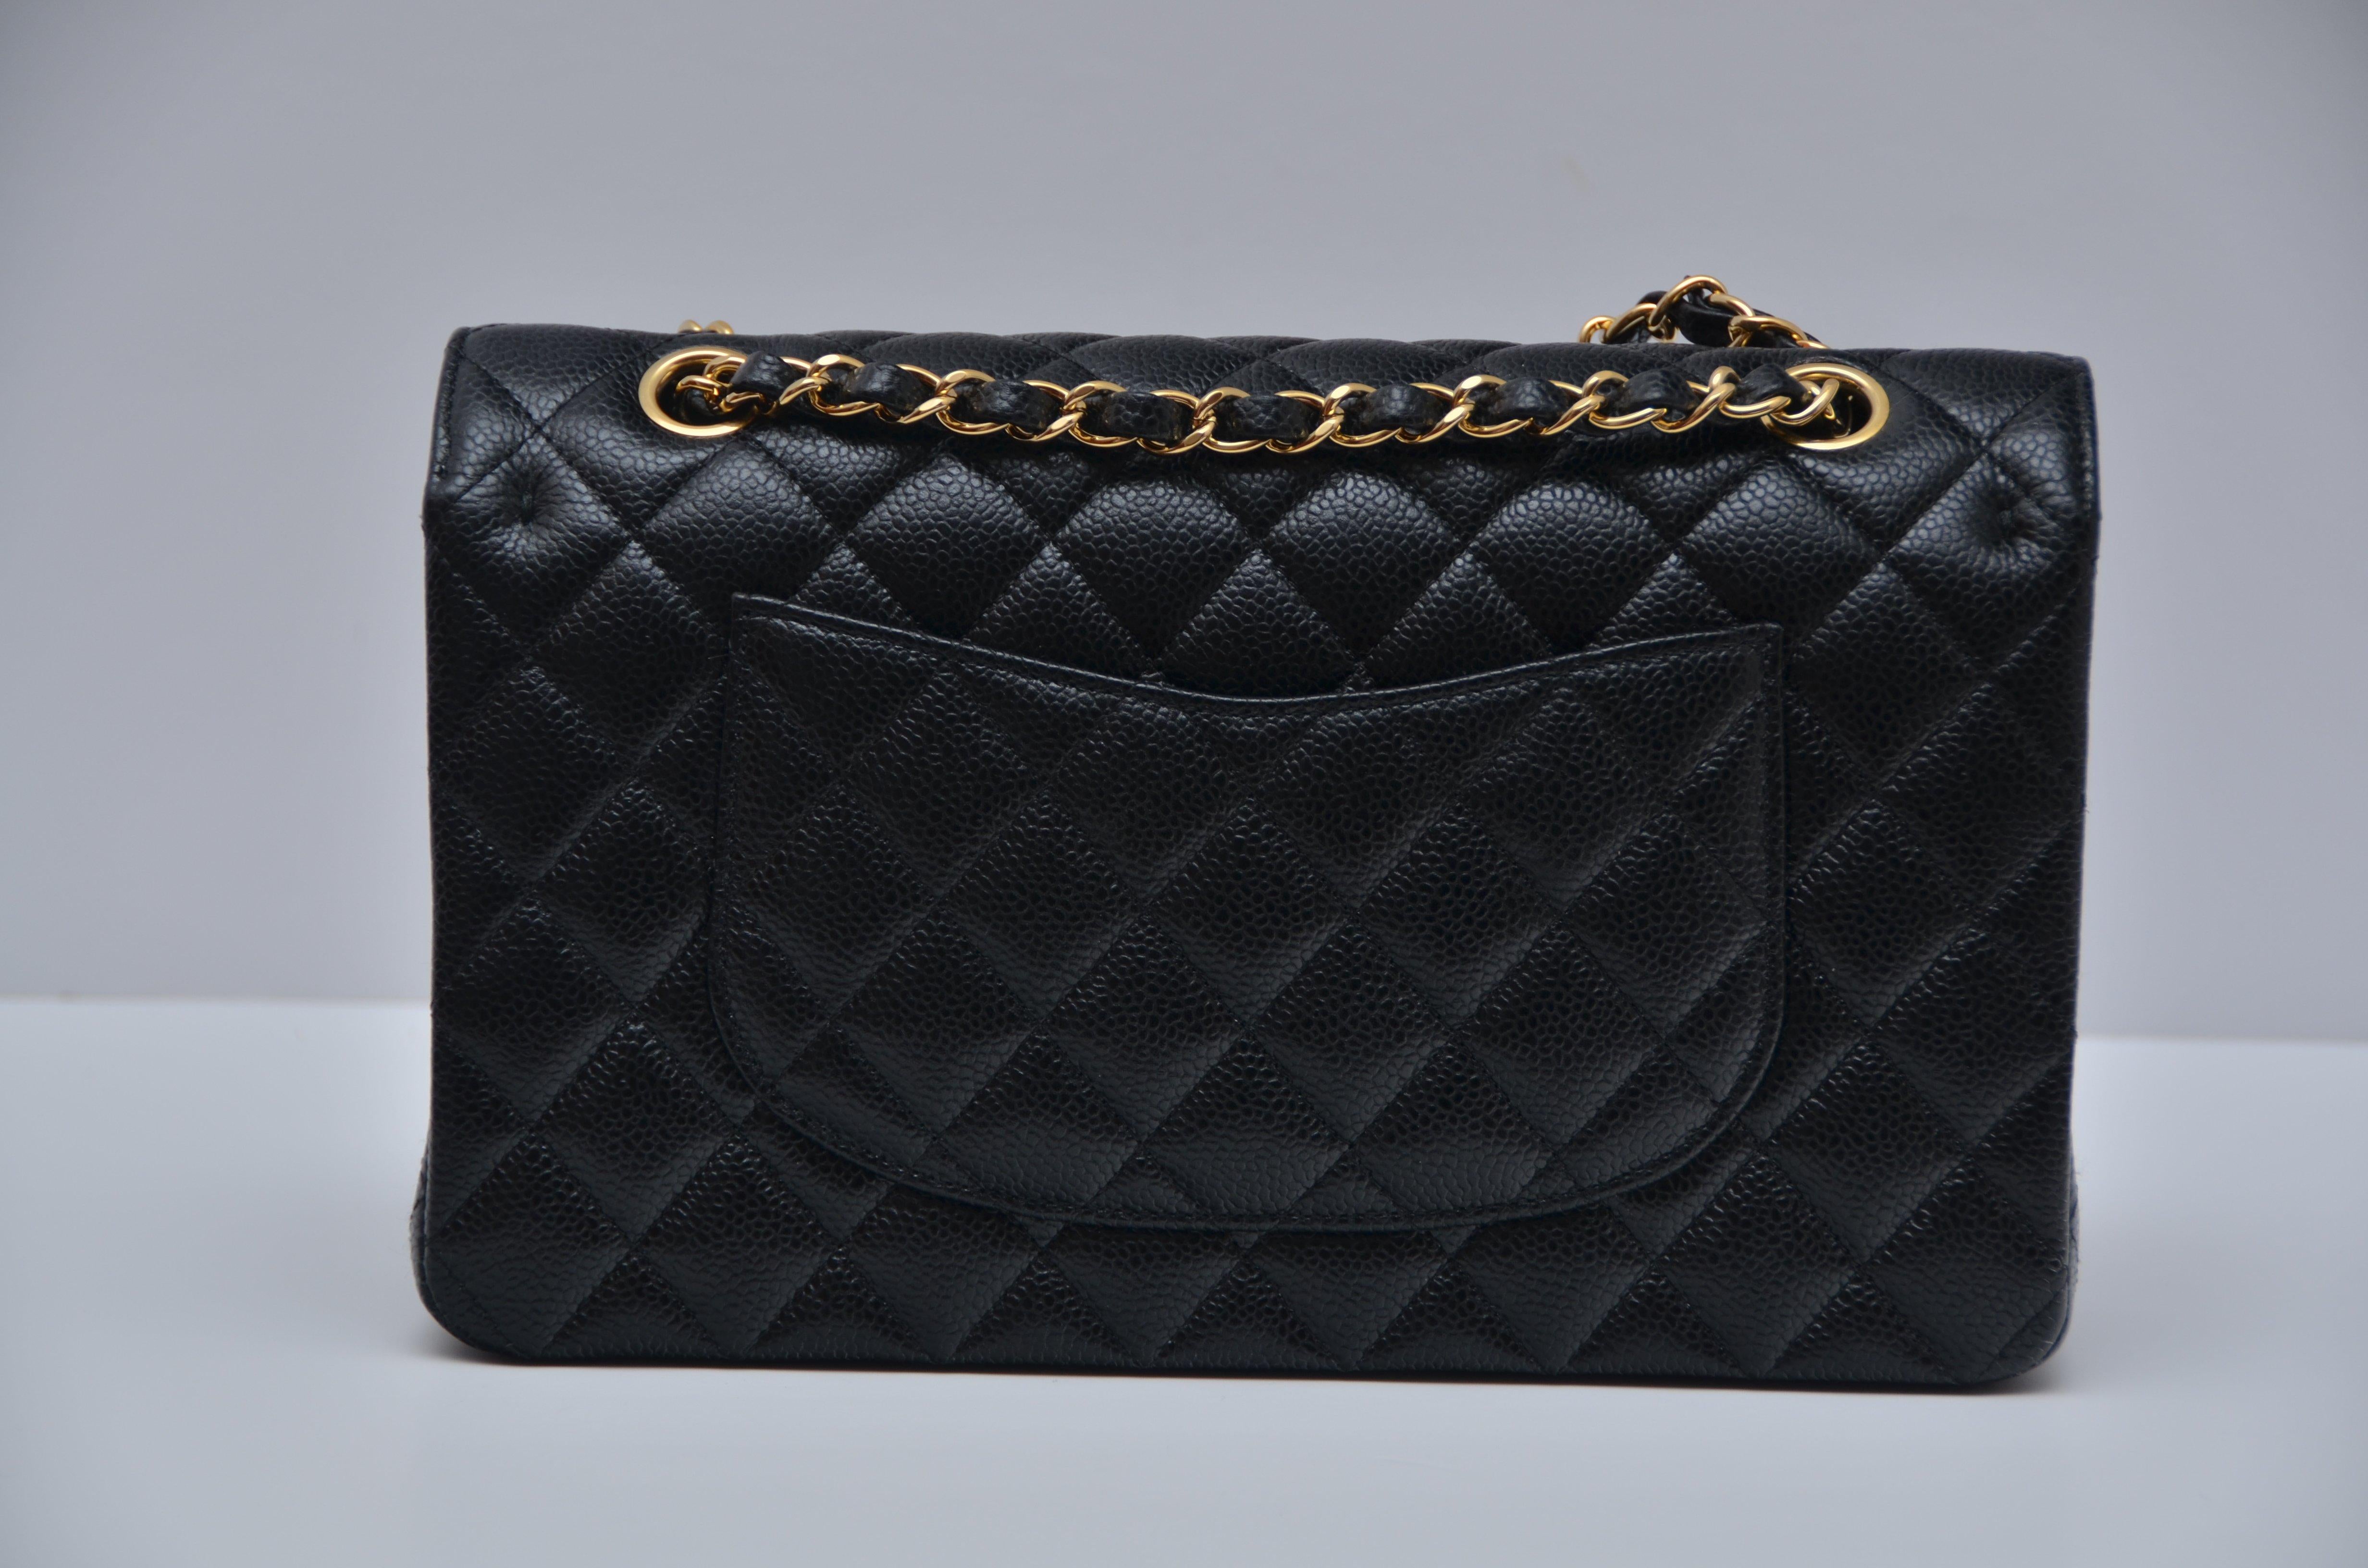 100% authentic guaranteed Chanel Double Flap handbag.
CHANEL Classic Double Flap Medium Shoulder Bag Black Caviar leather
BRAND NEW With tags attached.
Gold hardware.
Strap drop about 17